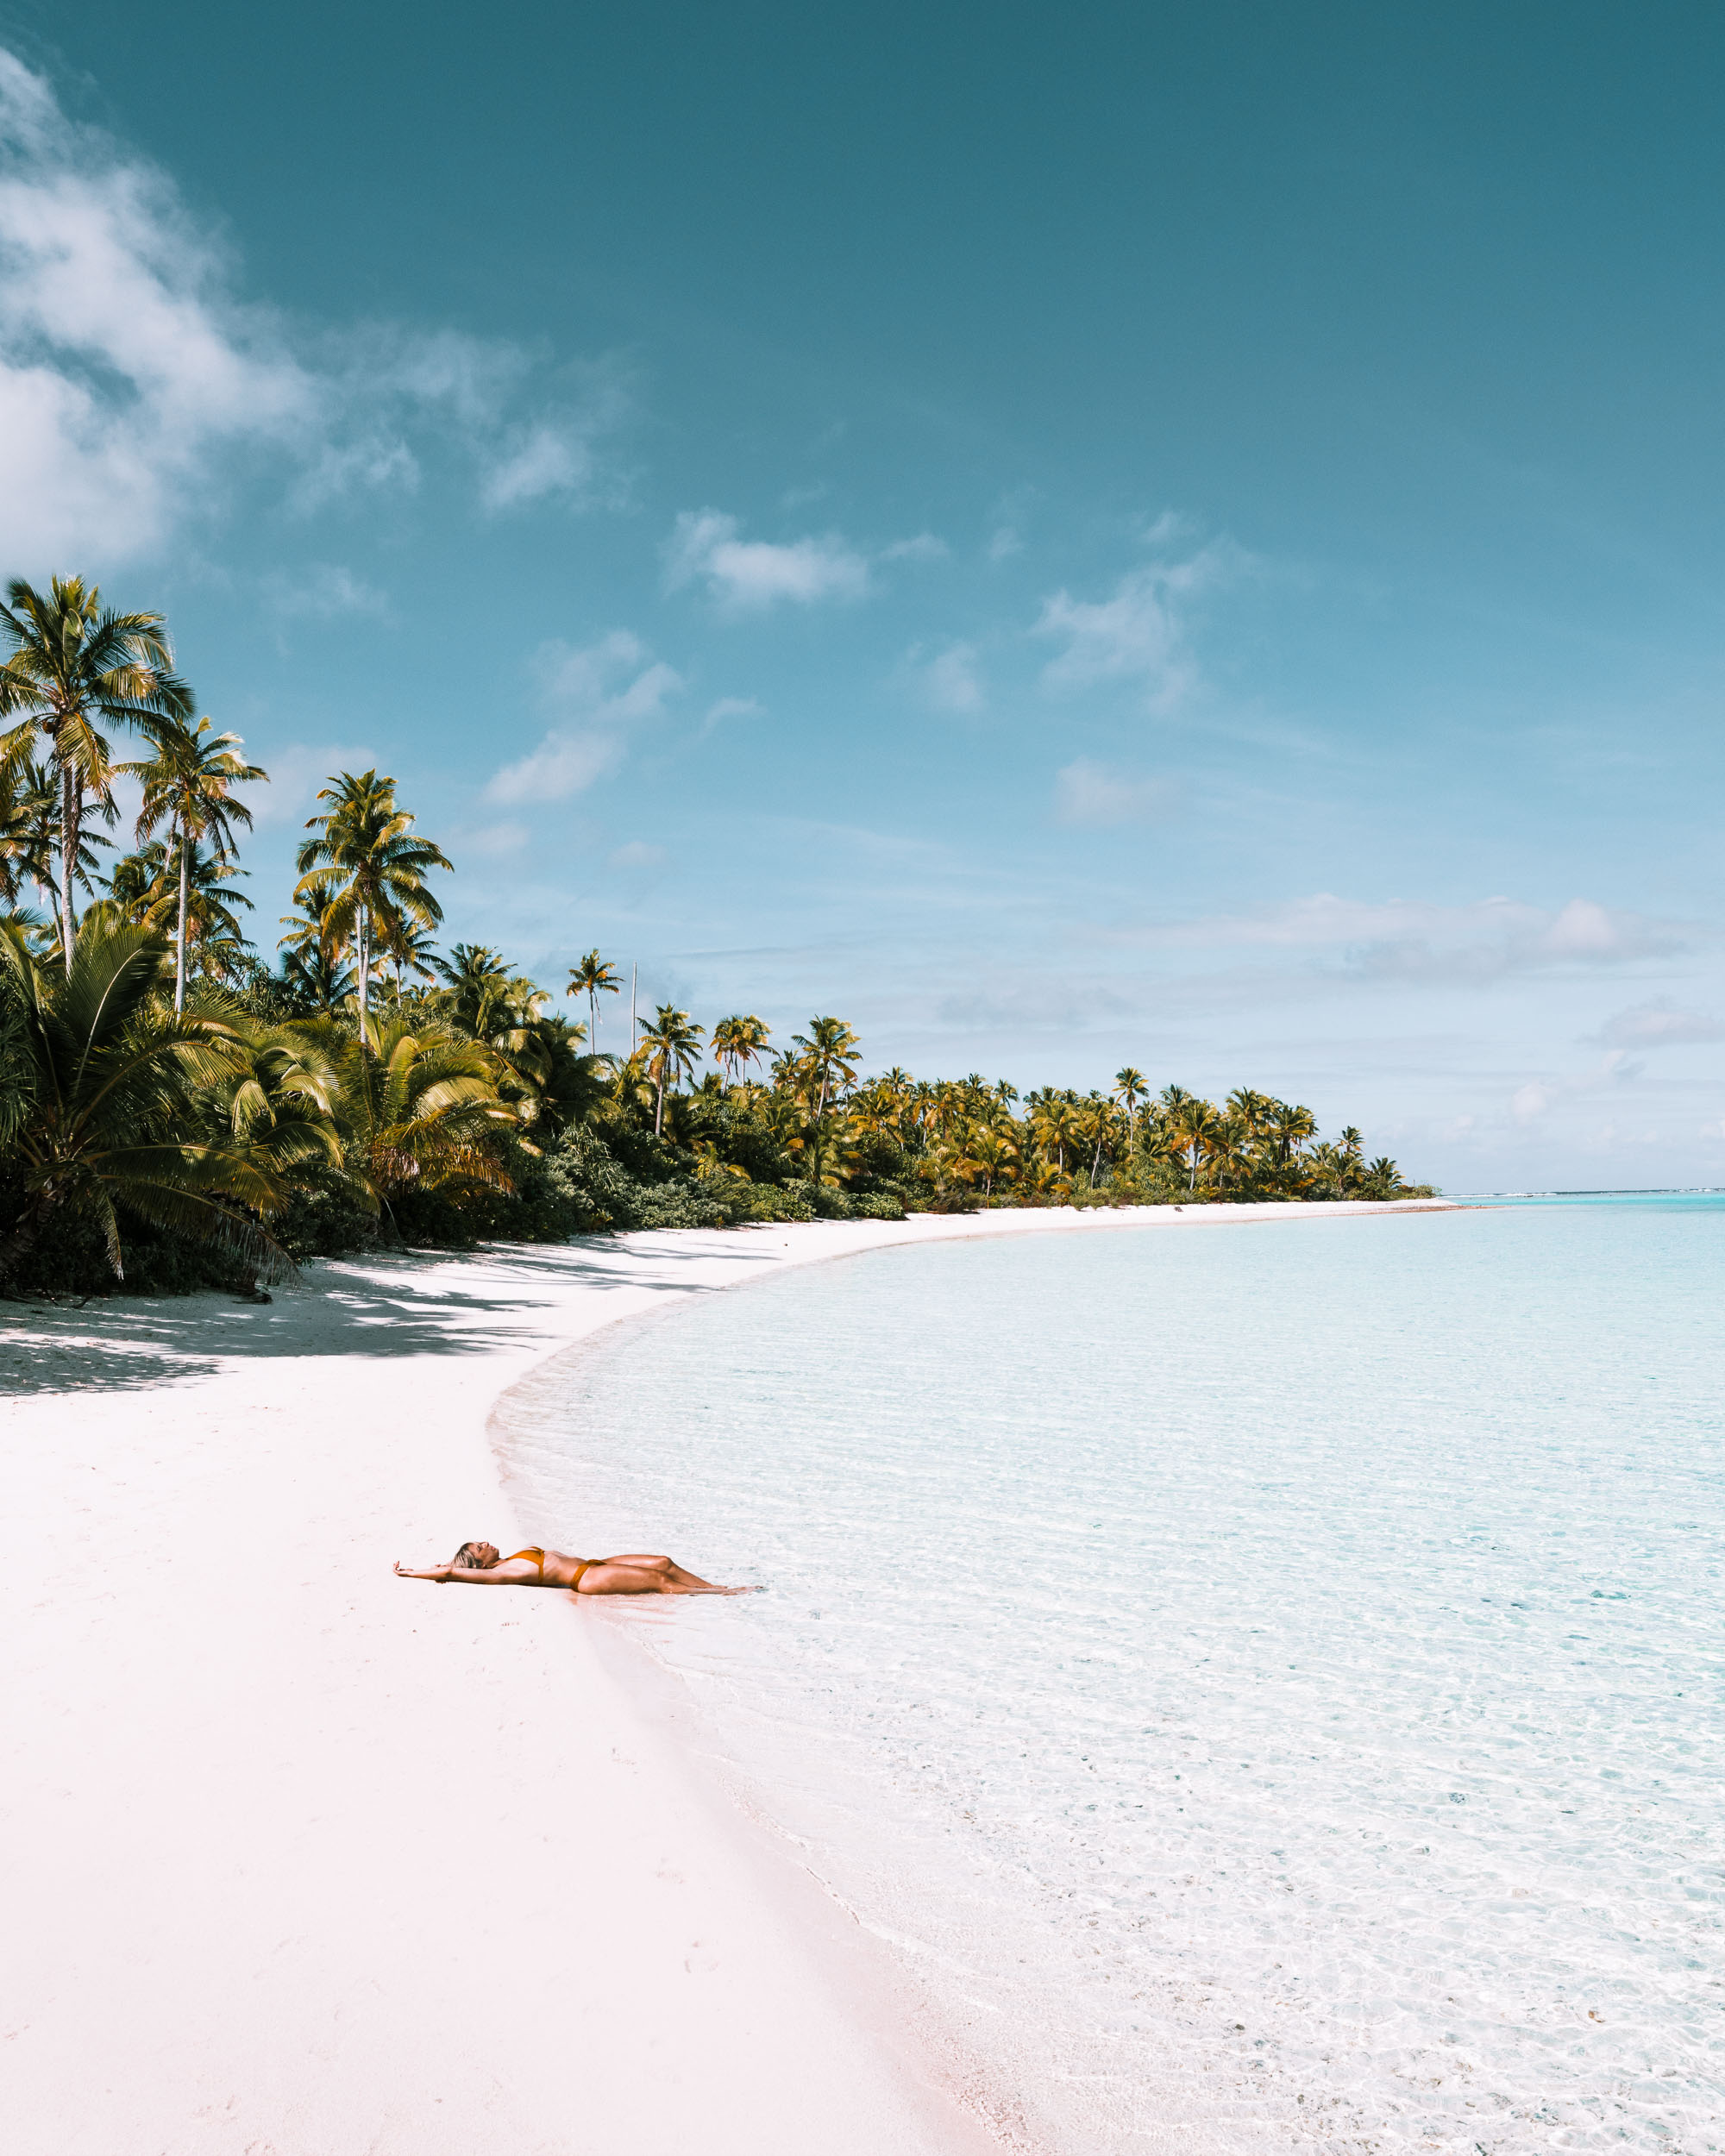 White sand beaches and palm trees and lying in the sand at One Foot Island in the Cook Islands